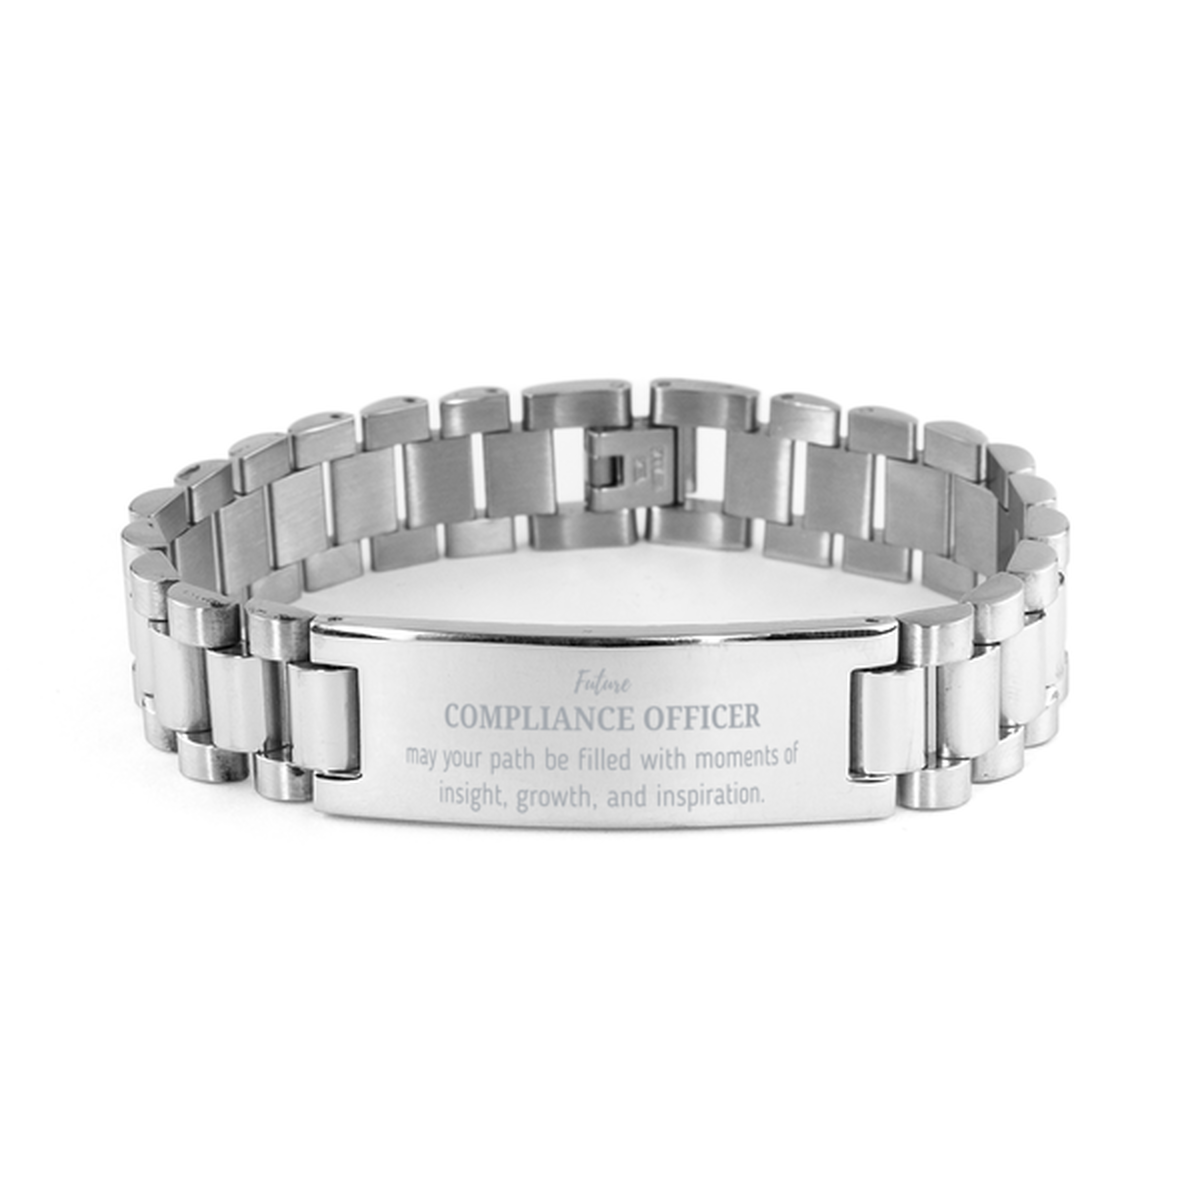 Future Compliance Officer Gifts, May your path be filled with moments of insight, Graduation Gifts for New Compliance Officer, Christmas Unique Ladder Stainless Steel Bracelet For Men, Women, Friends